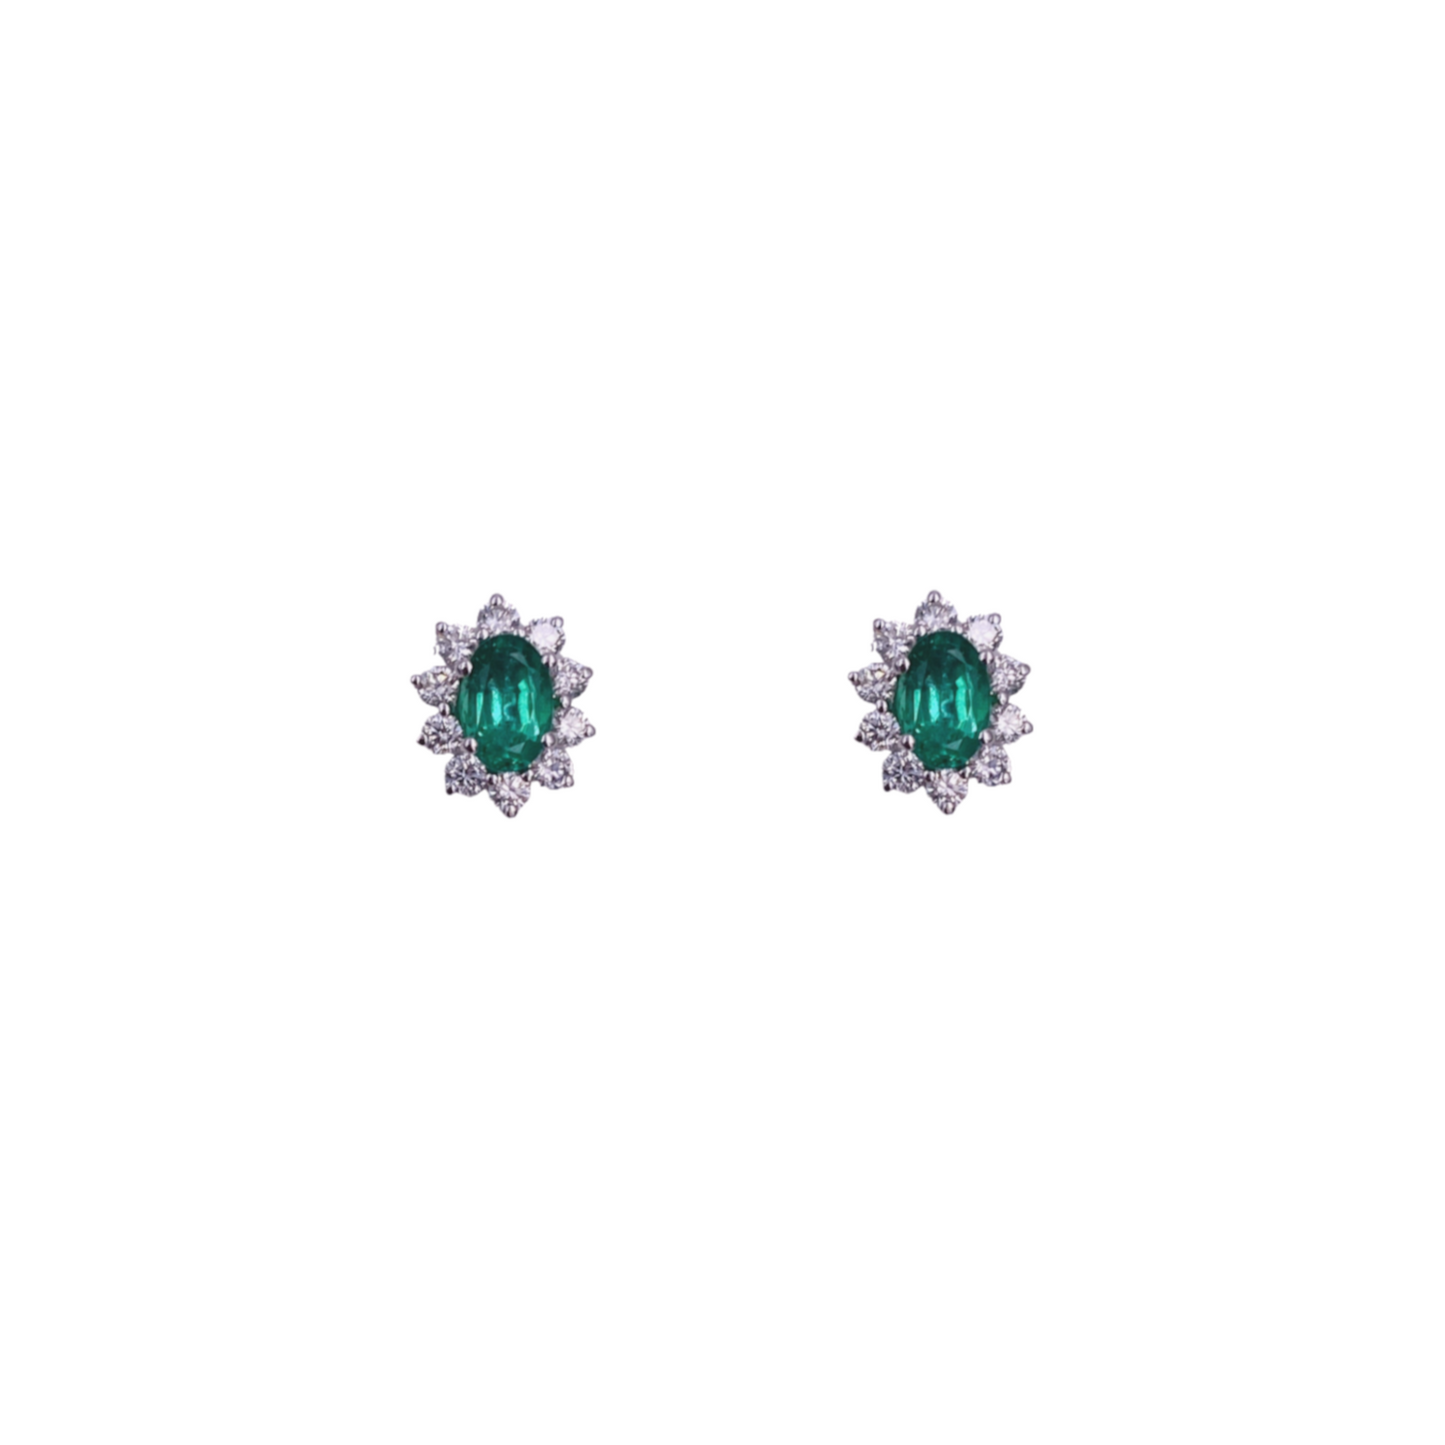 Emerald Color Earrings, White Gold and Diamonds